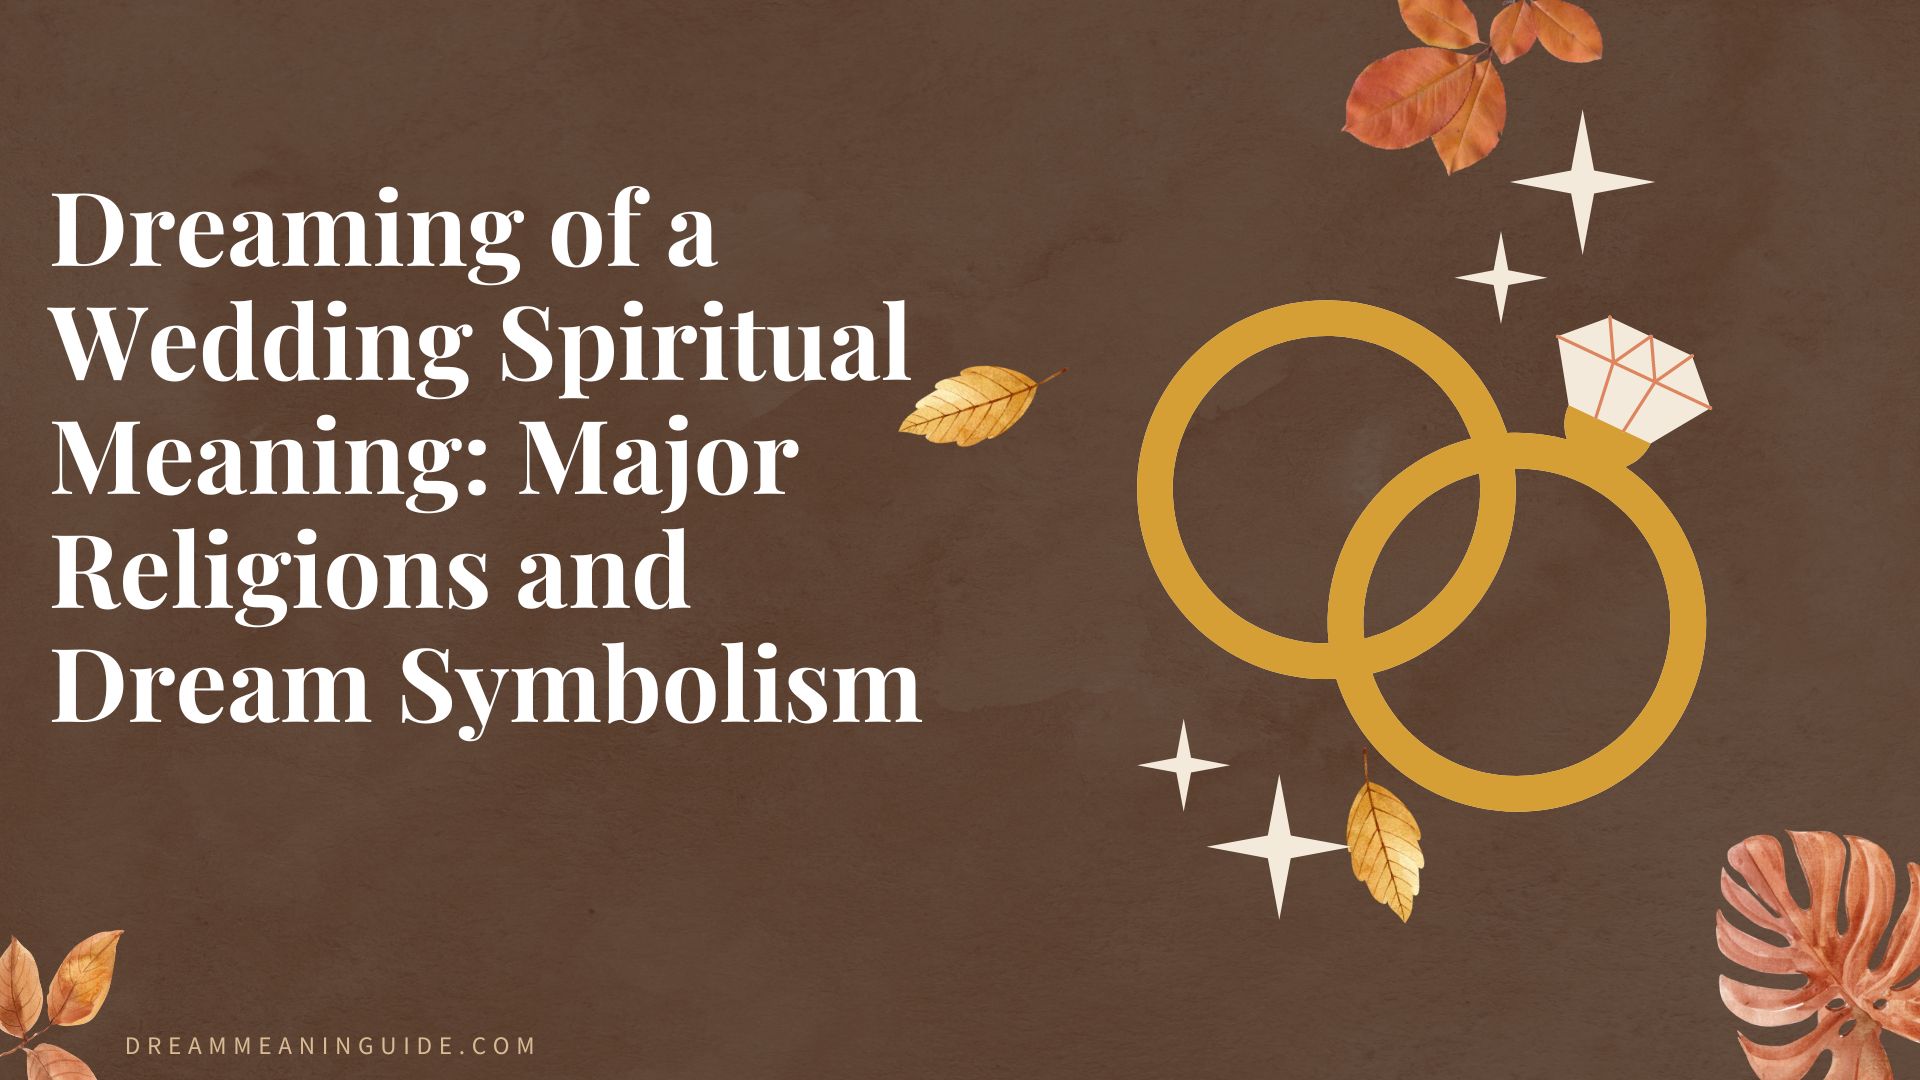 Dreaming of a Wedding Spiritual Meaning Major Religions and Dream Symbolism